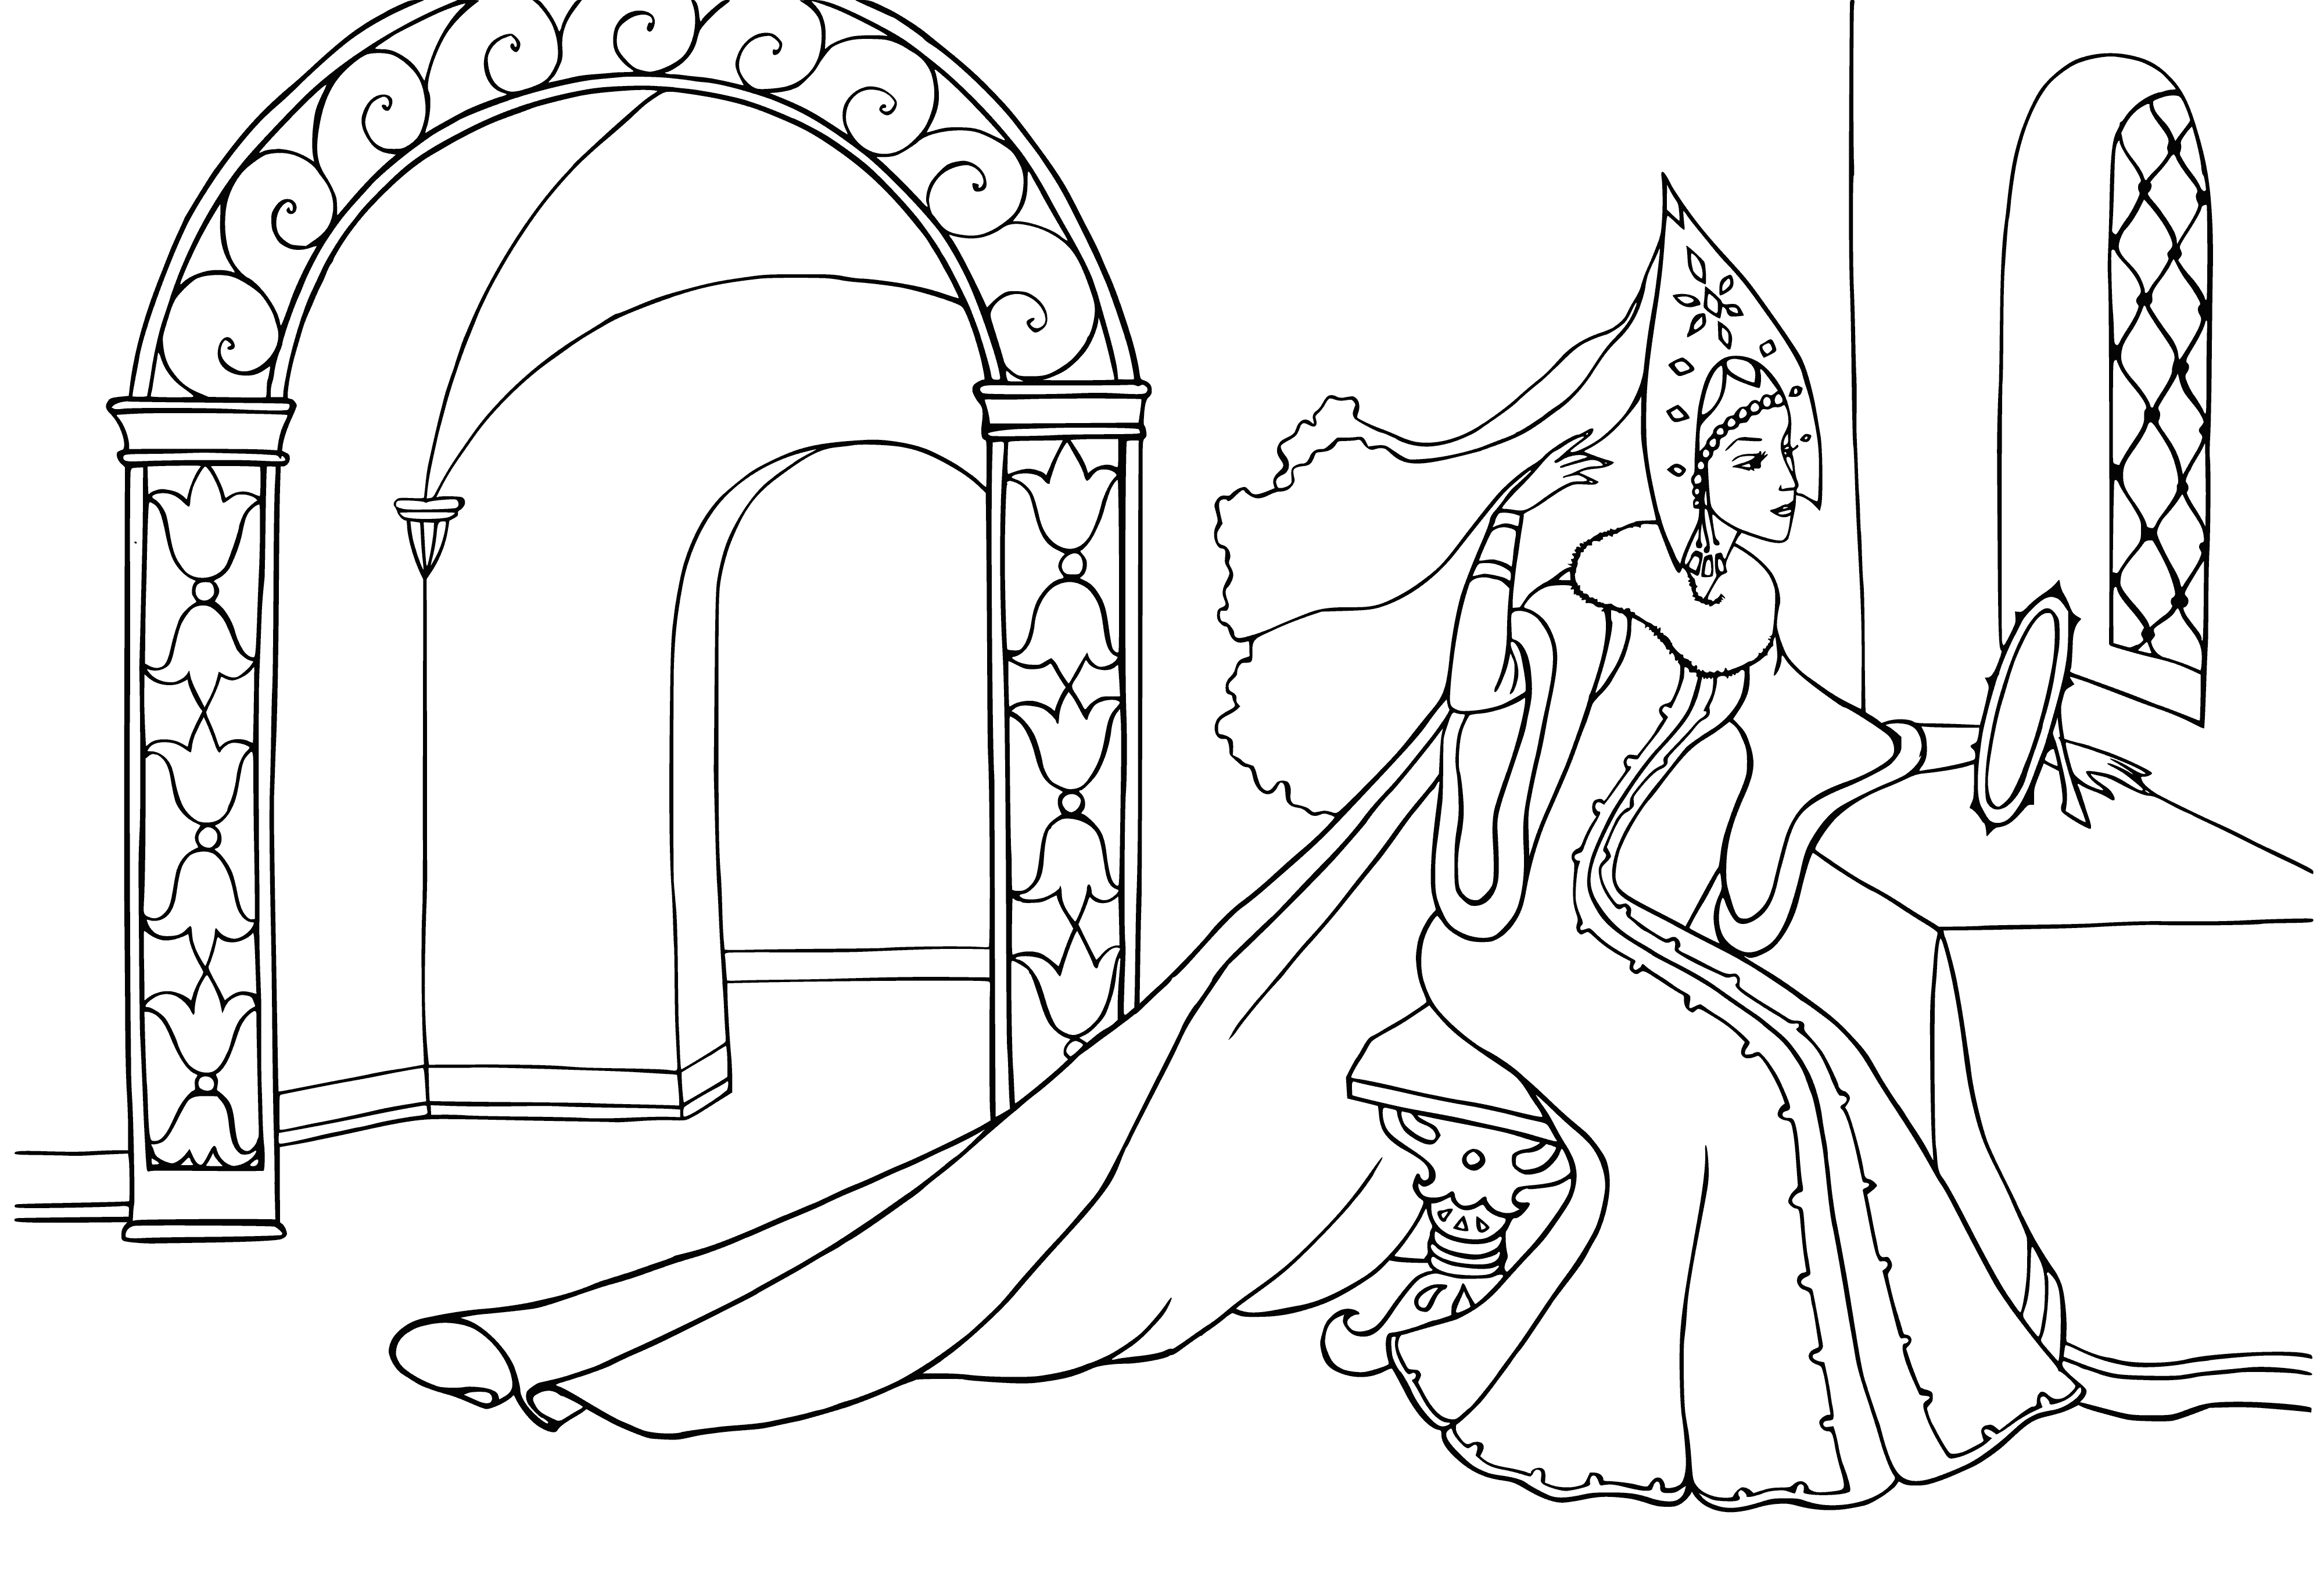 In front of the mirror coloring page